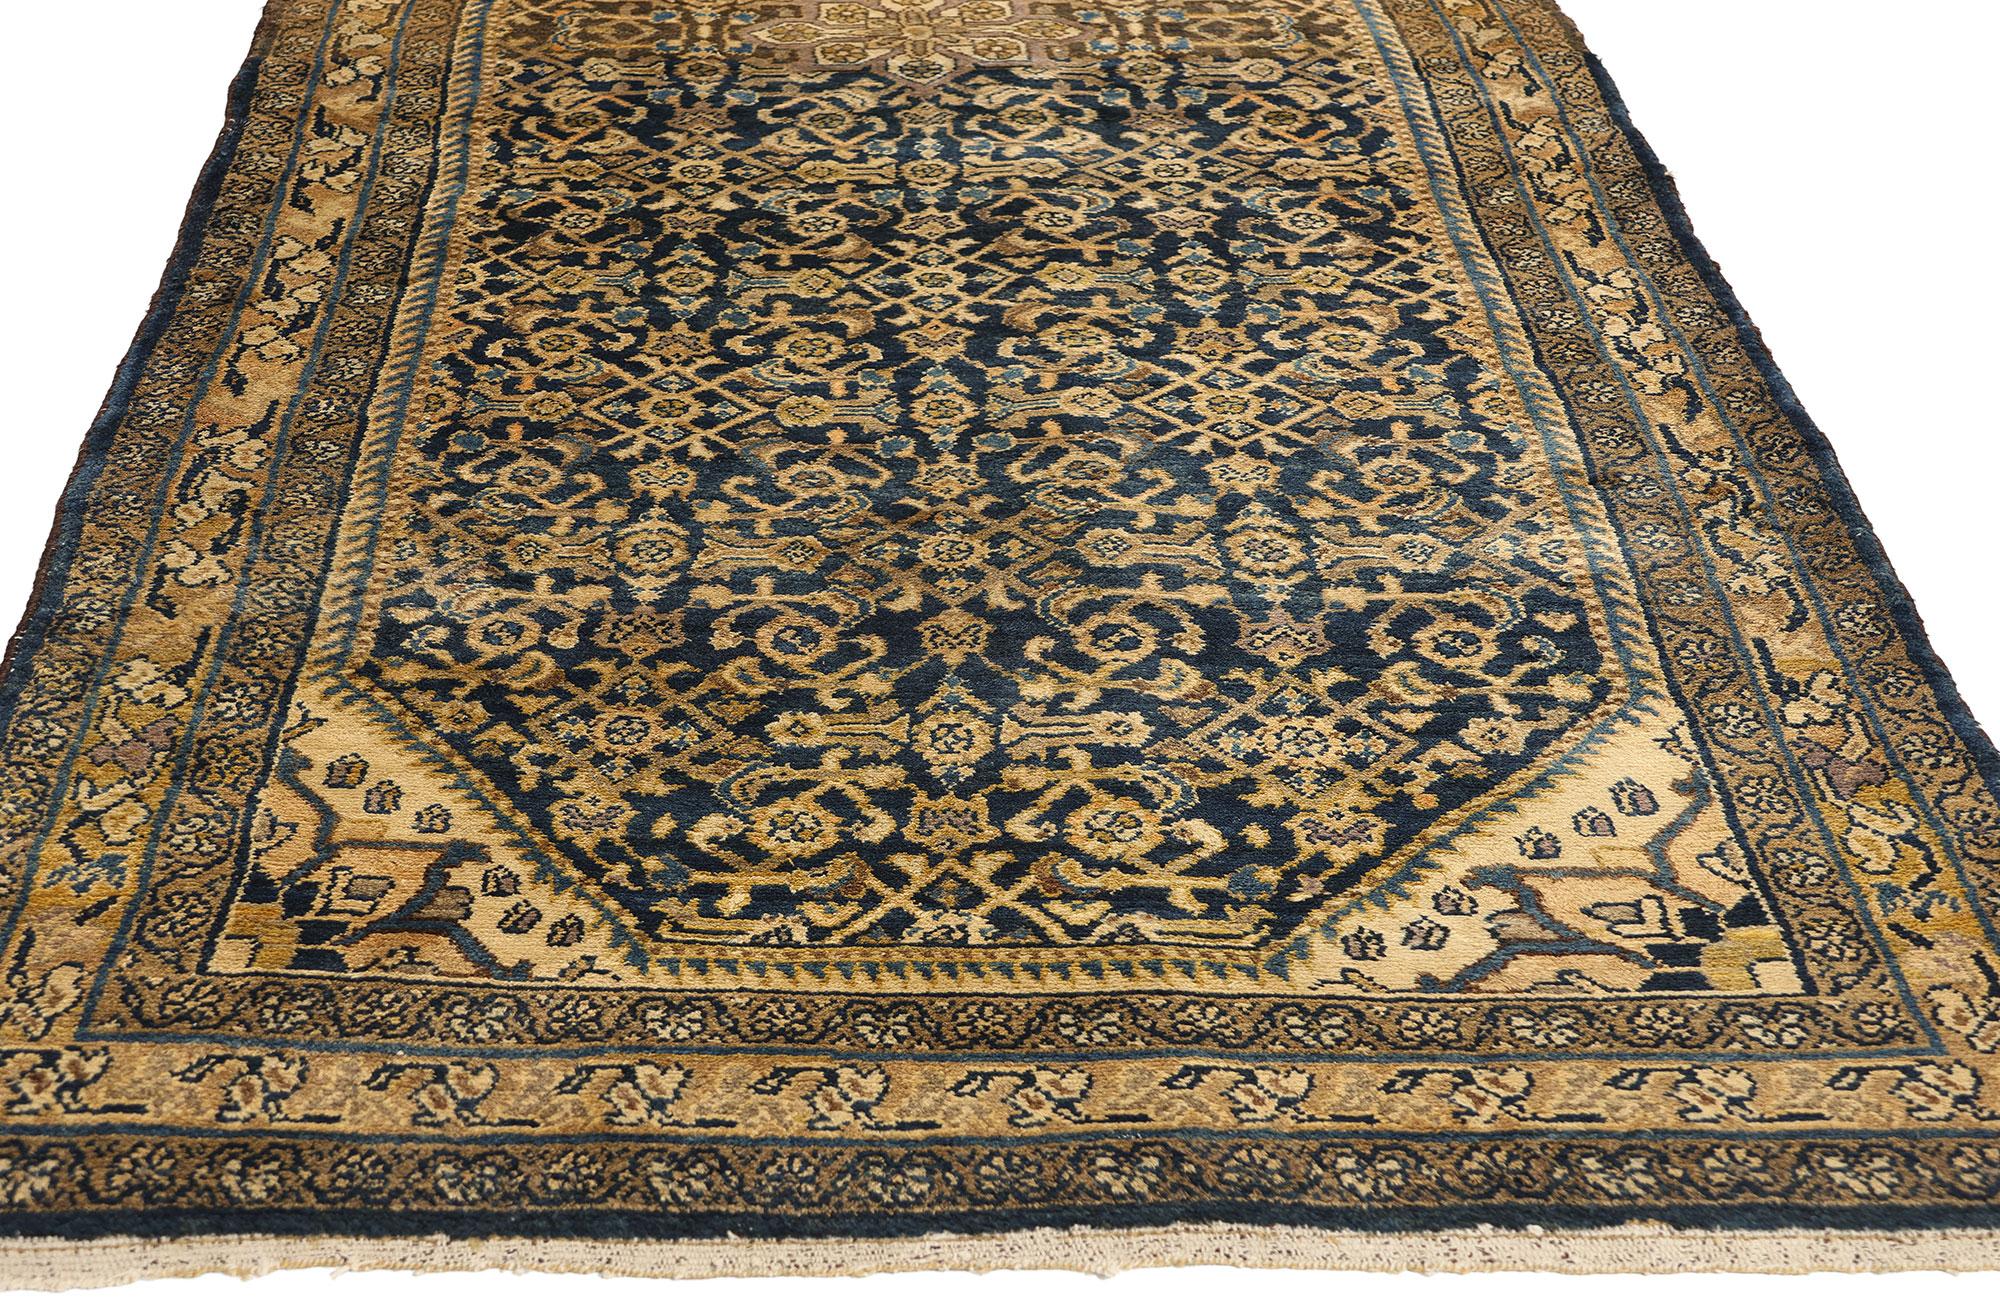 73251 Antique Persian Hamadan Rug Runner, 03'09 x 11'05. Persian Hamadan rugs and carpet runners originate from the Hamadan region in Iran, renowned for its rich tradition of rug weaving. These handcrafted rugs are celebrated for their durability,